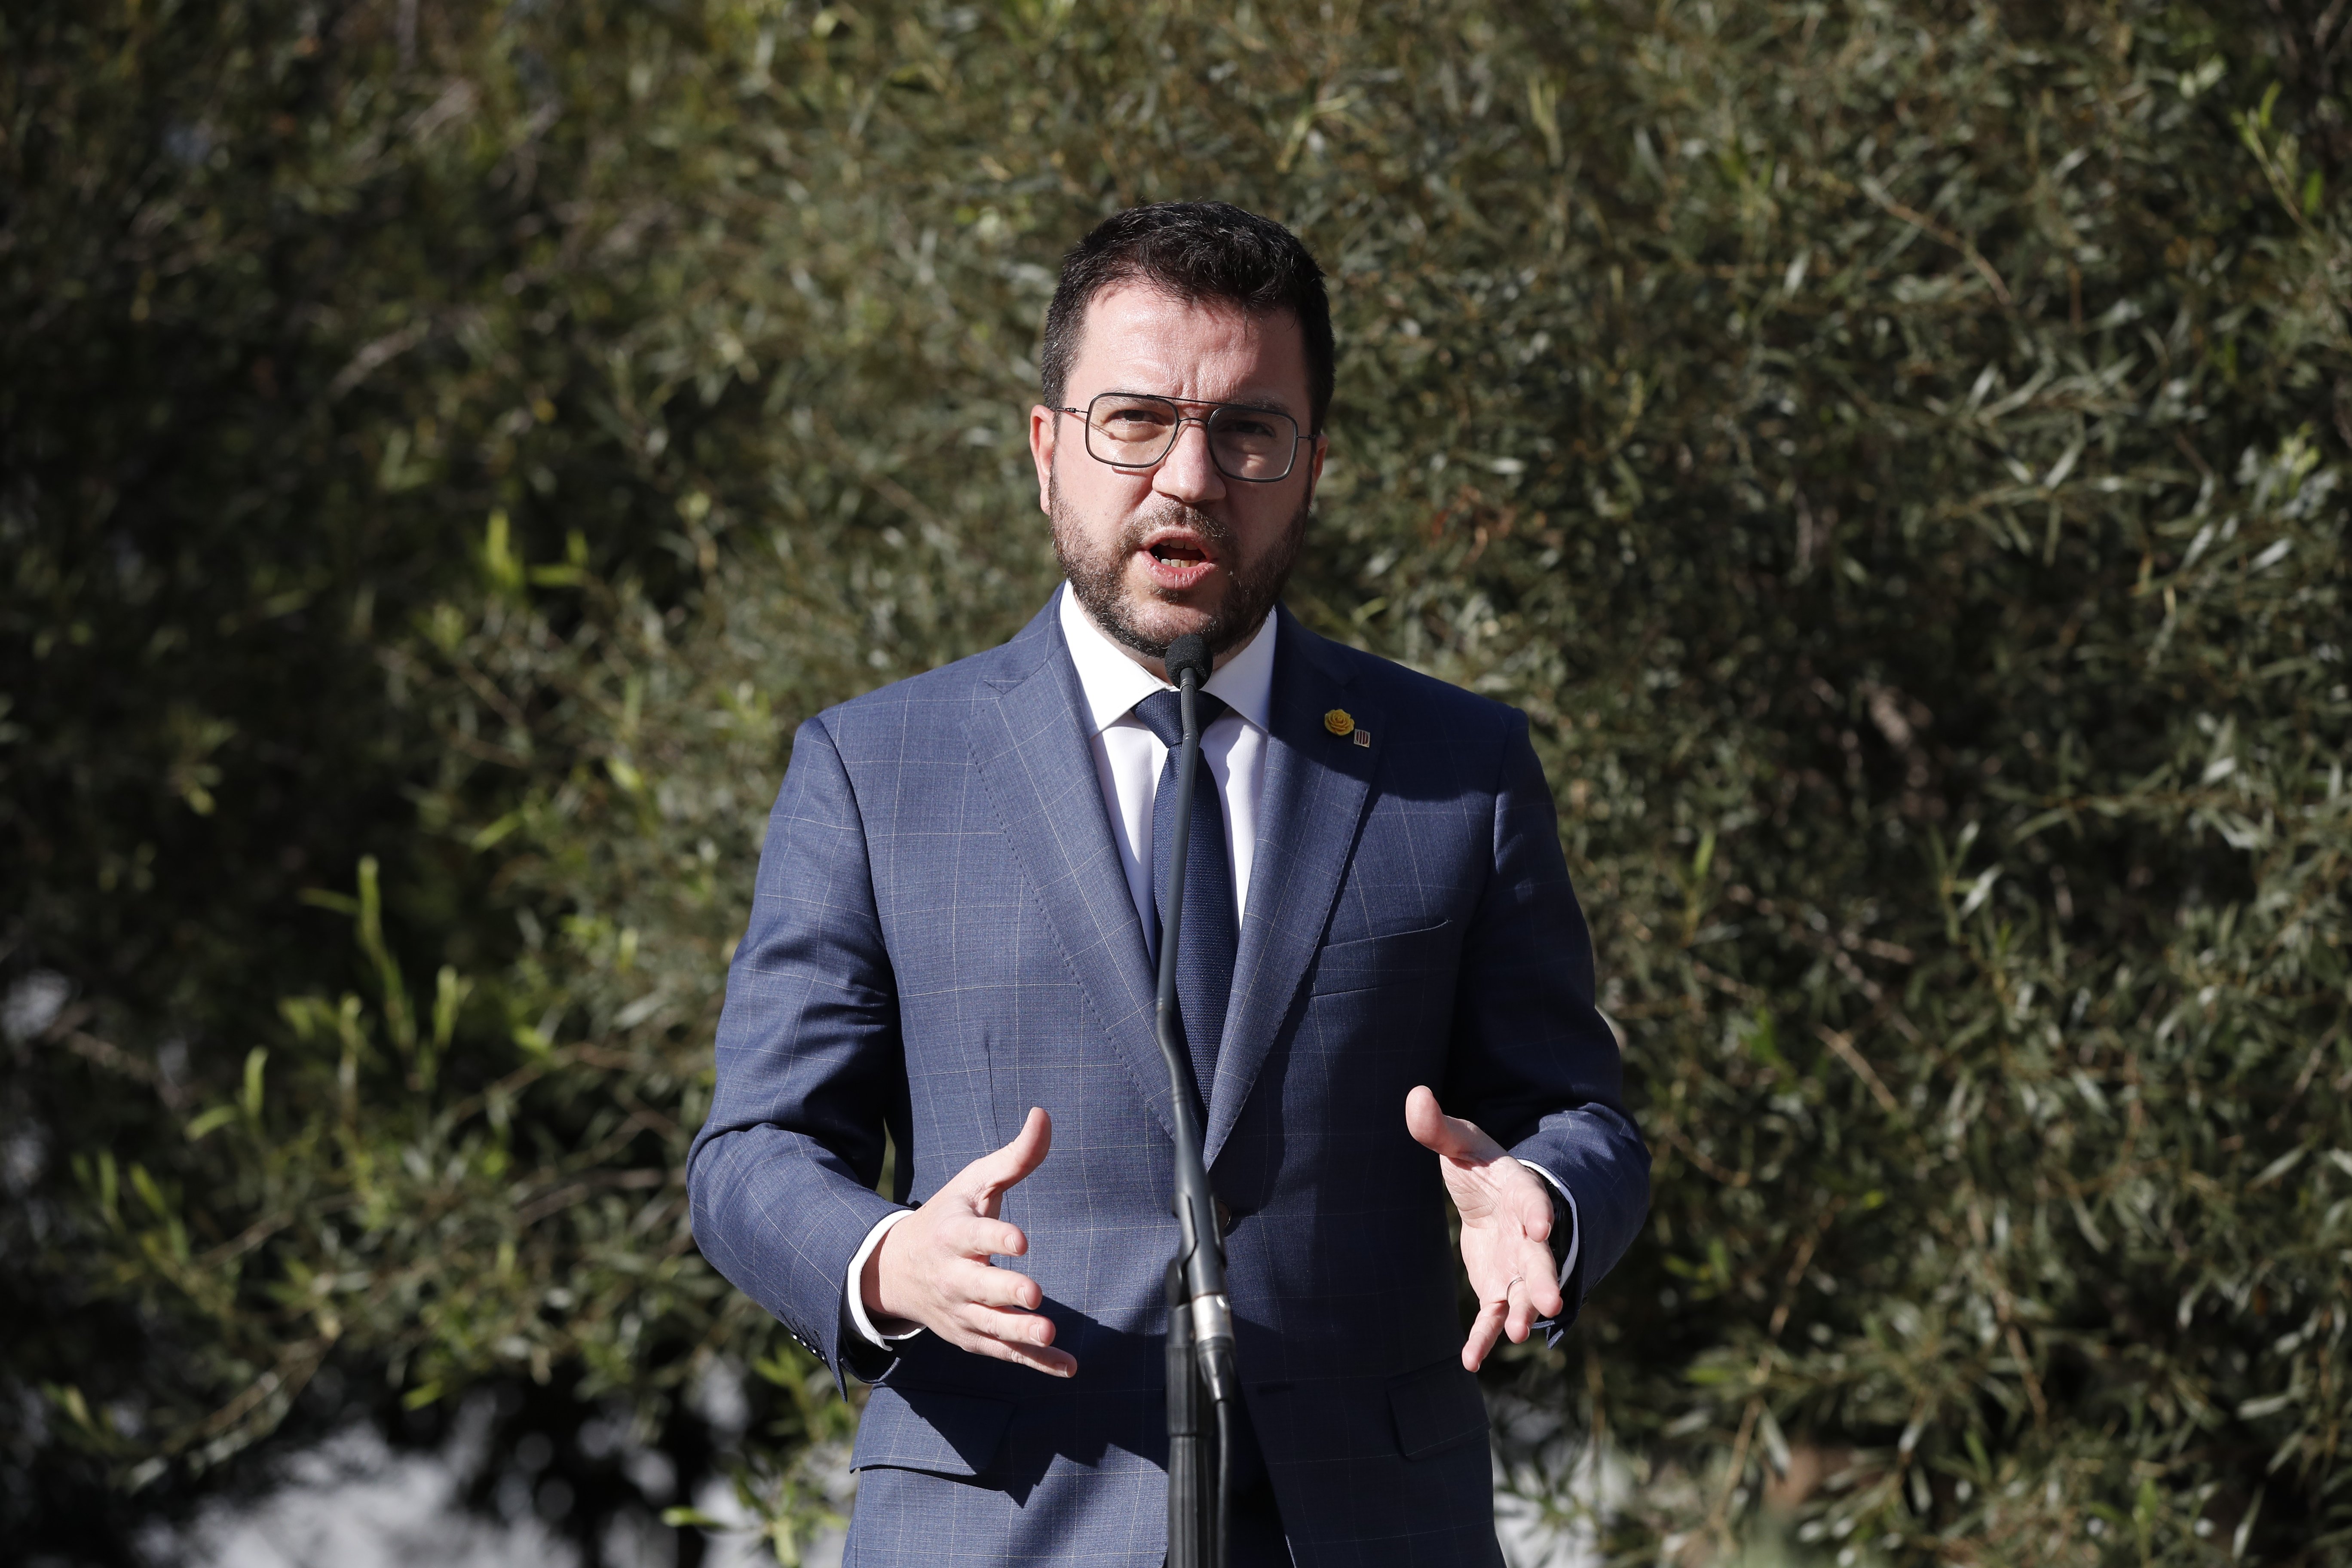 Catalan president Aragonès defends language pact that recognizes Spanish in schools